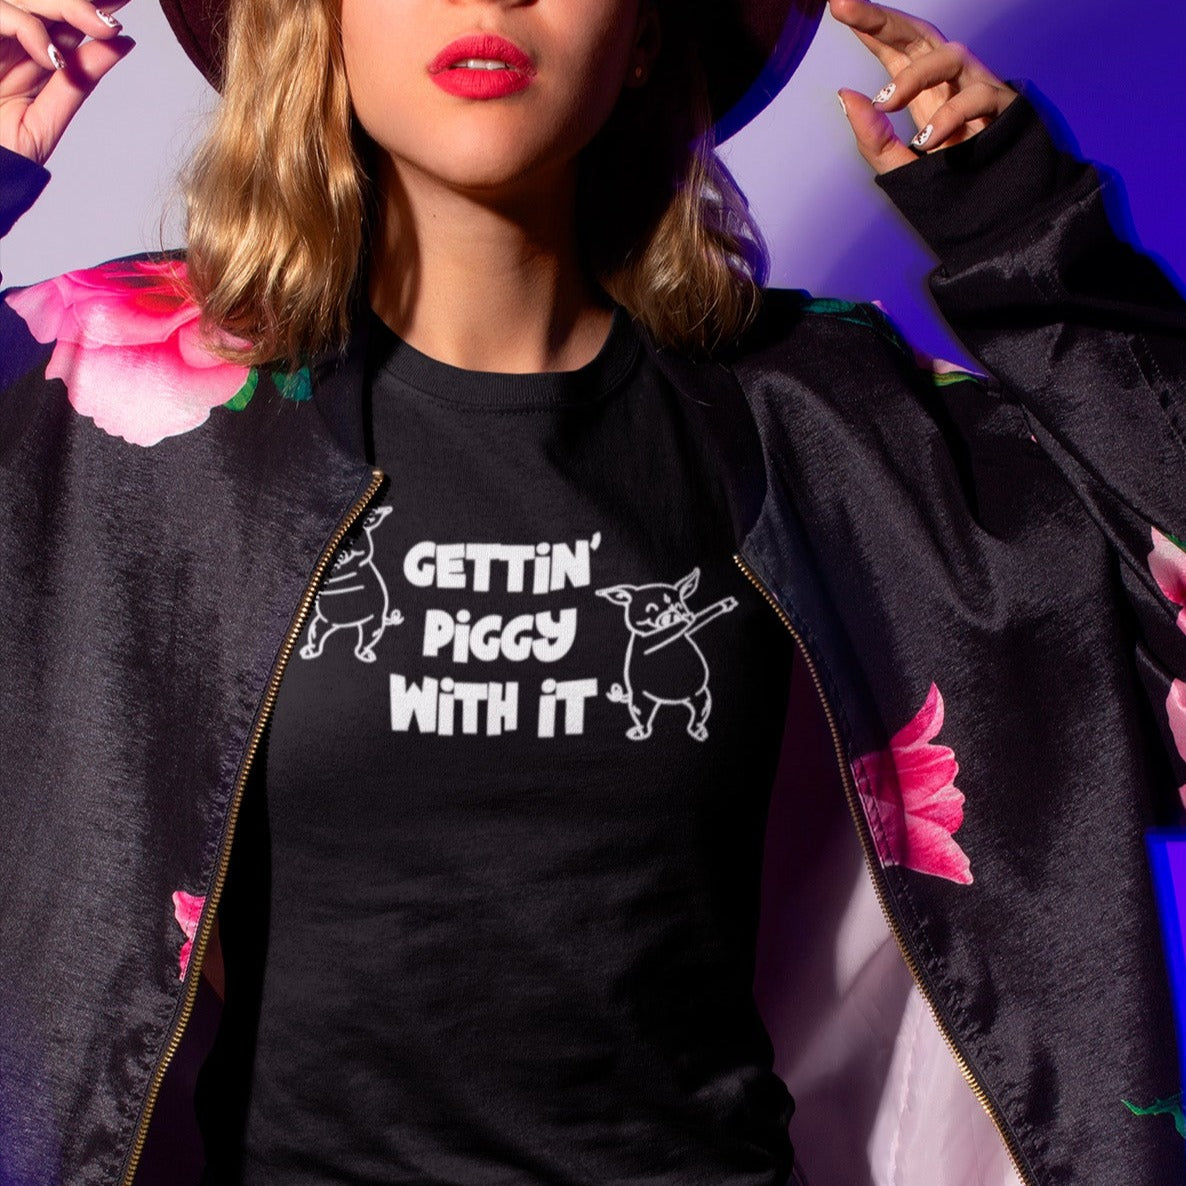 gettin-piggy-with-it-black-t-shirt-funny-dancing-pigs-mockup-featuring-a-pretty-girl-posing-in-a-hipster-style